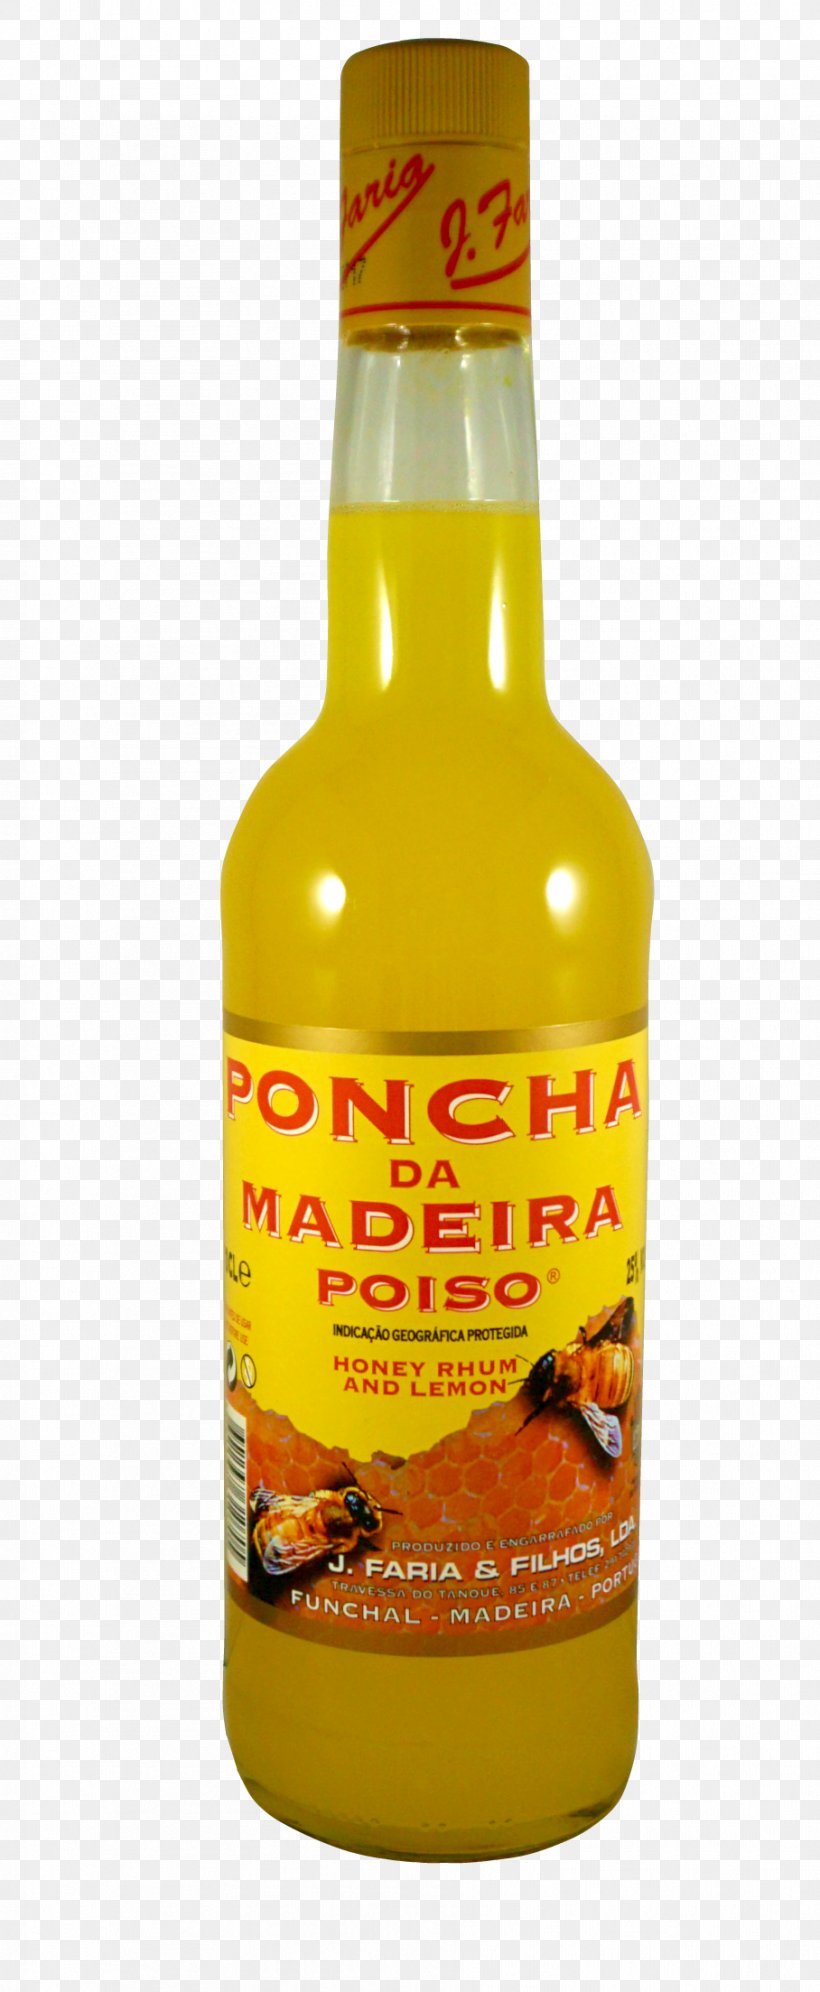 Poncha Madeira Island Liqueur Orange Drink Alcoholic Beverages, PNG, 908x2206px, Madeira Island, Alcohol, Alcoholic Beverages, Cocktail, Condiment Download Free